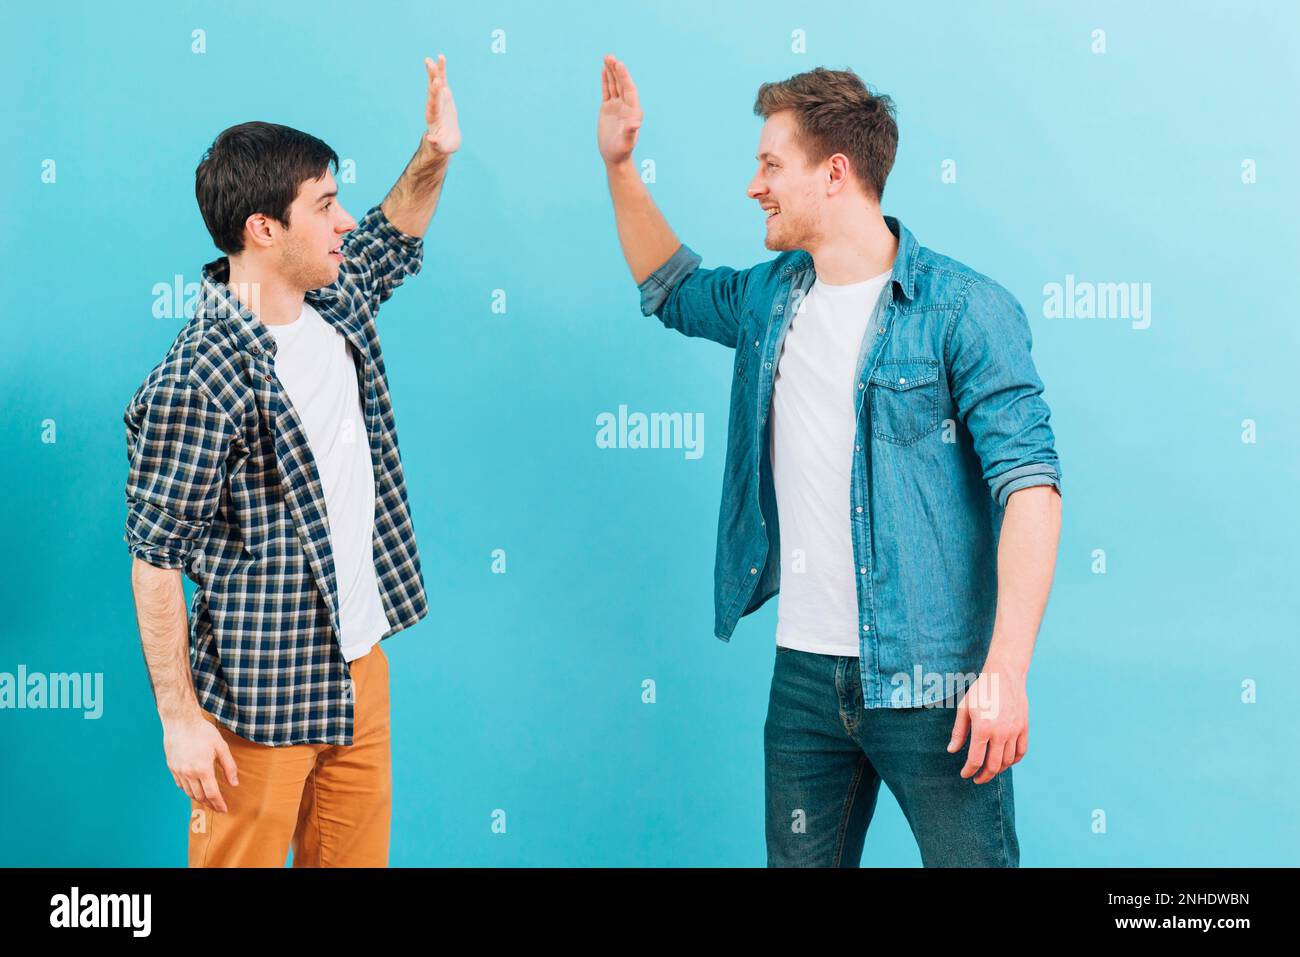 young male friend giving high five against blue background. High resolution photo Stock Photo